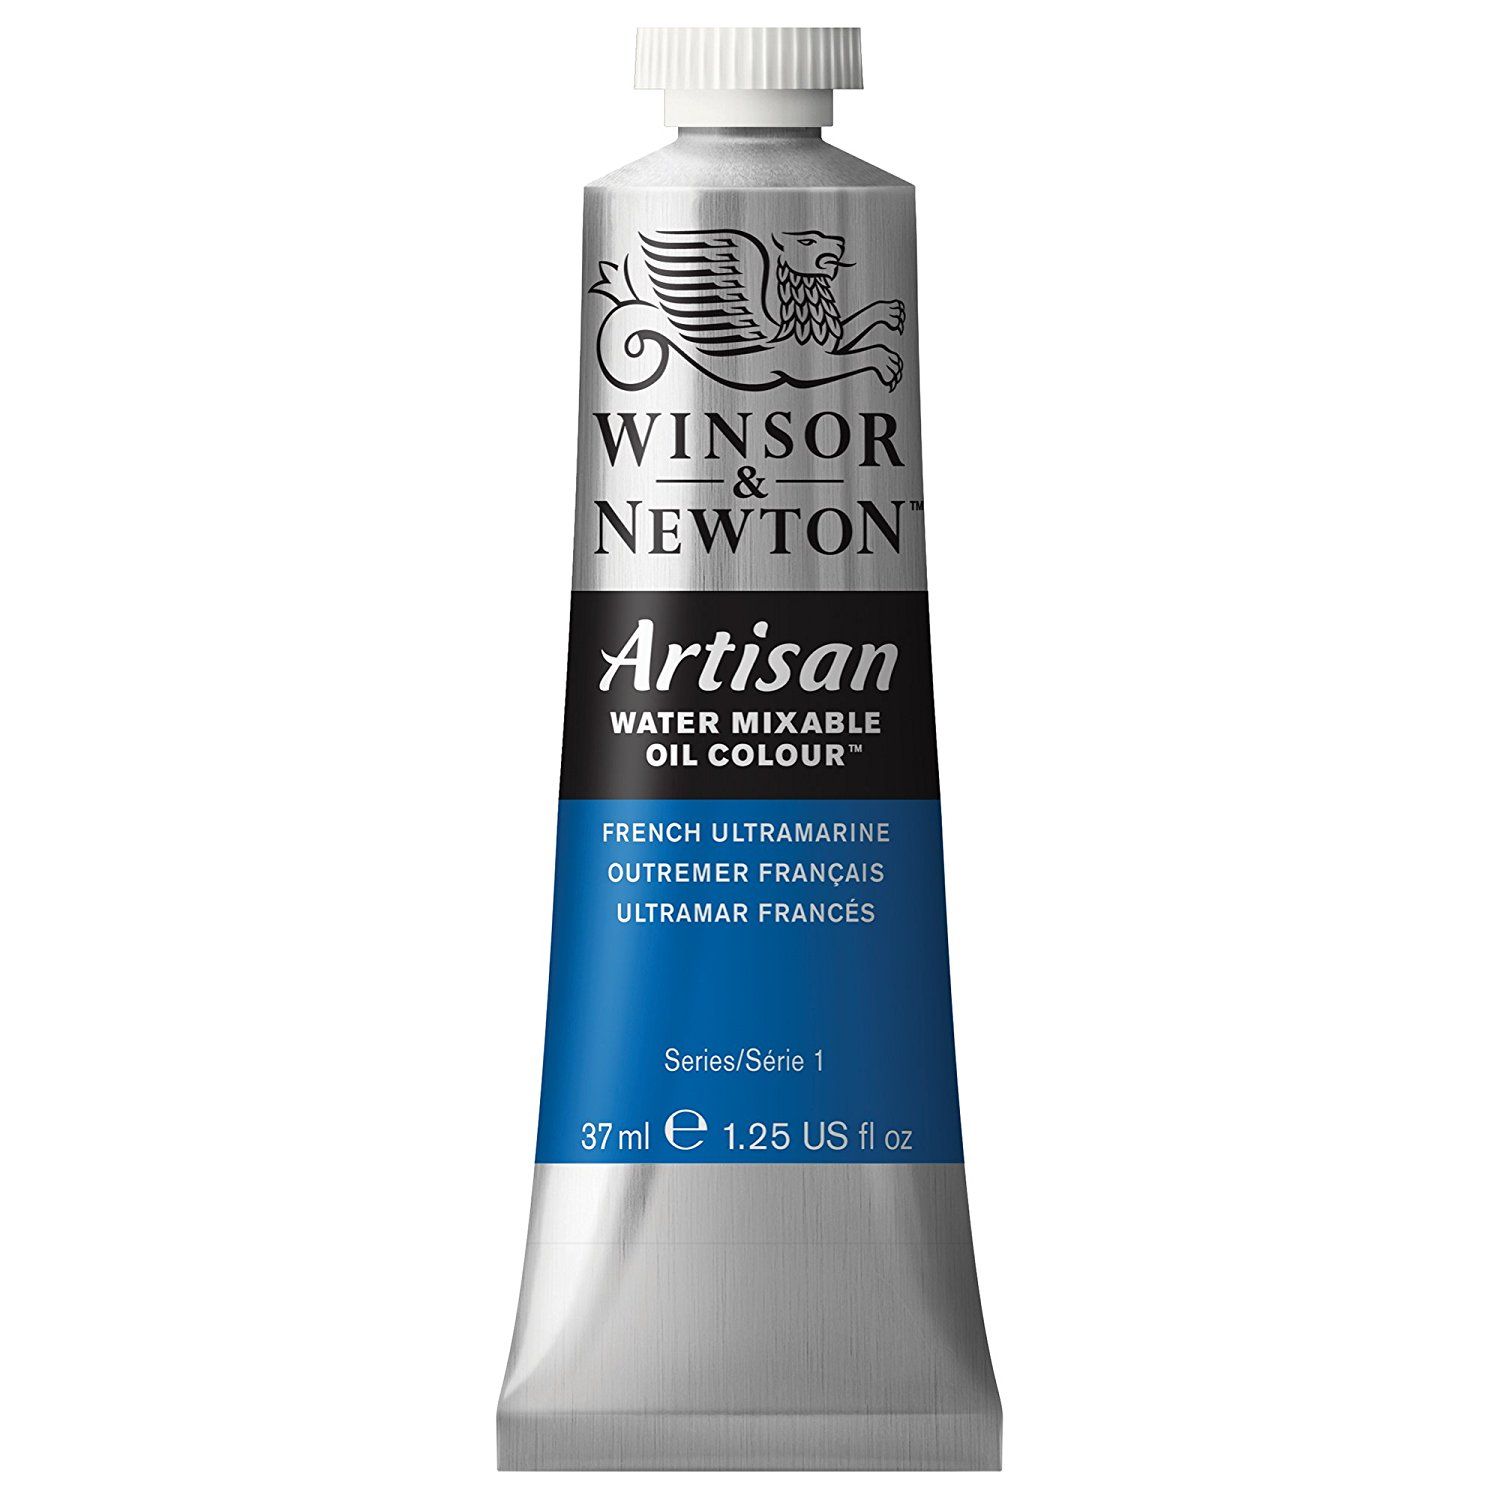 Artisan Water Mixable Oil - French Ultramarine 37ml